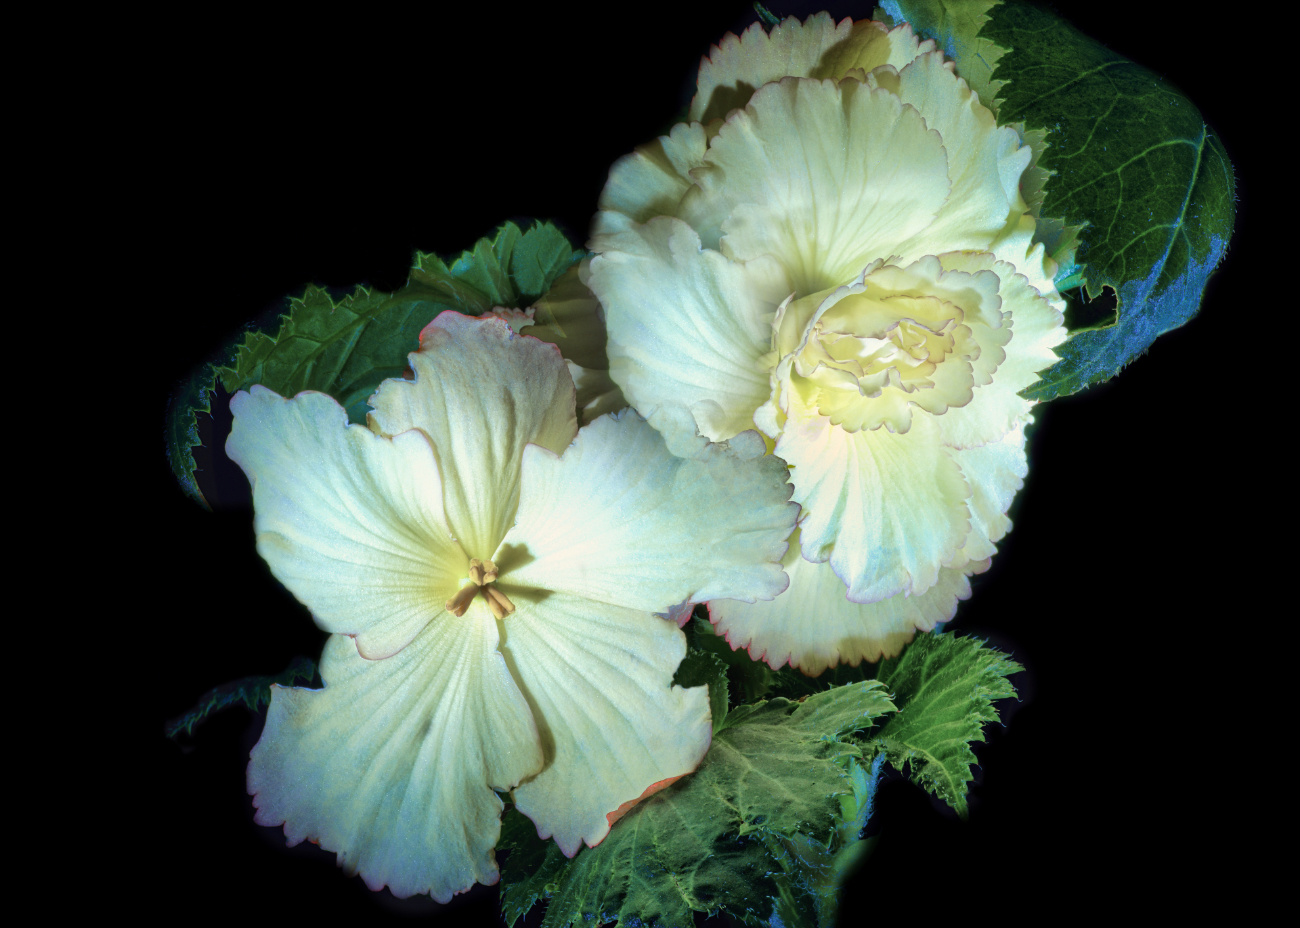 Beguiling Begonias by Rich James